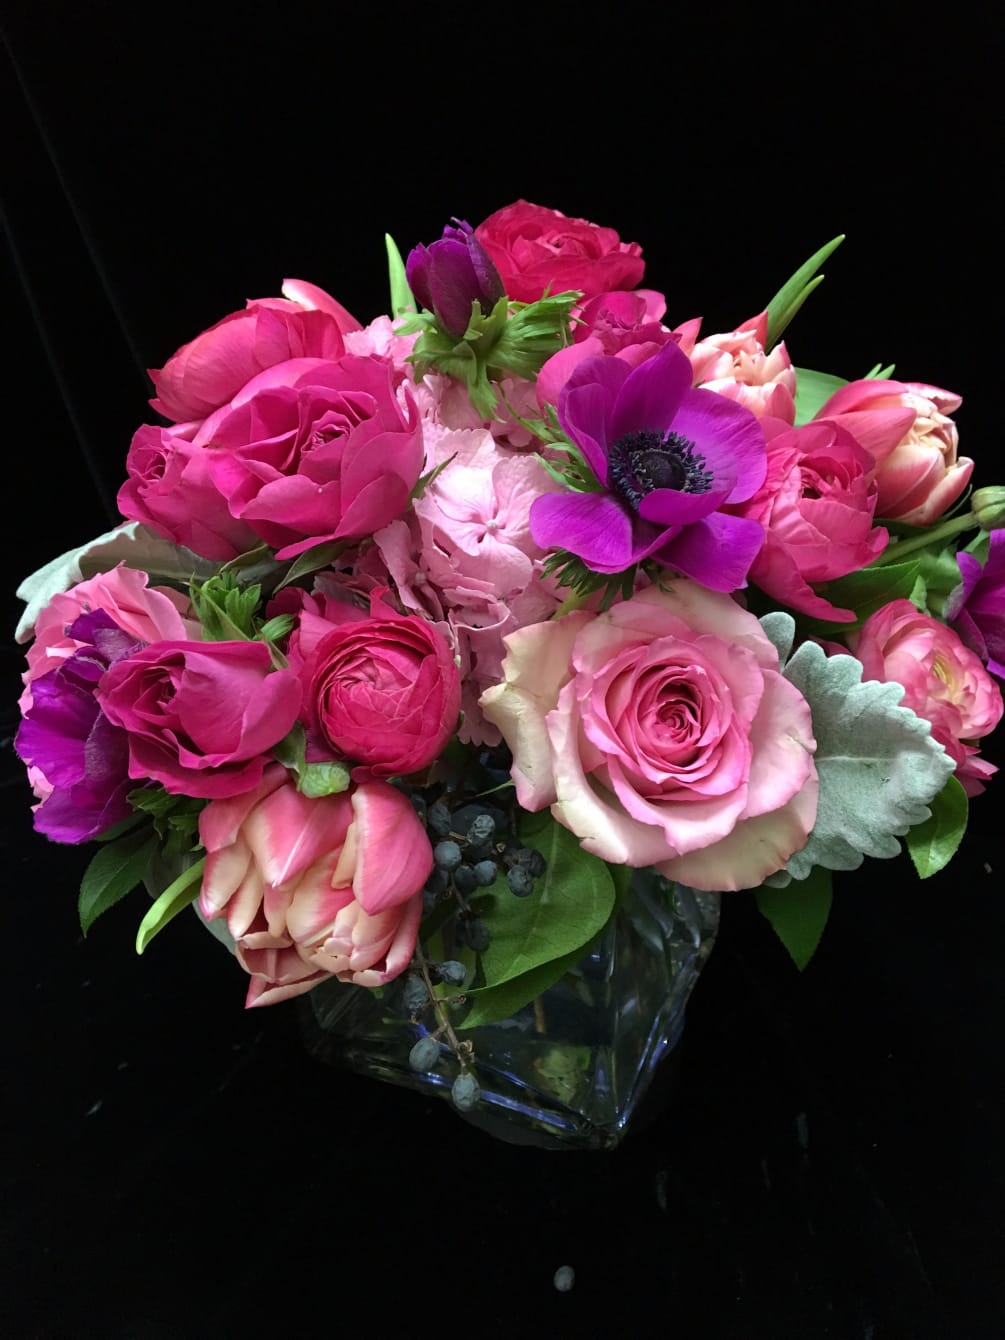 Keeping it subdued but still luscious- Roses, Tulips, Anemones. and Ranunculus
Make your